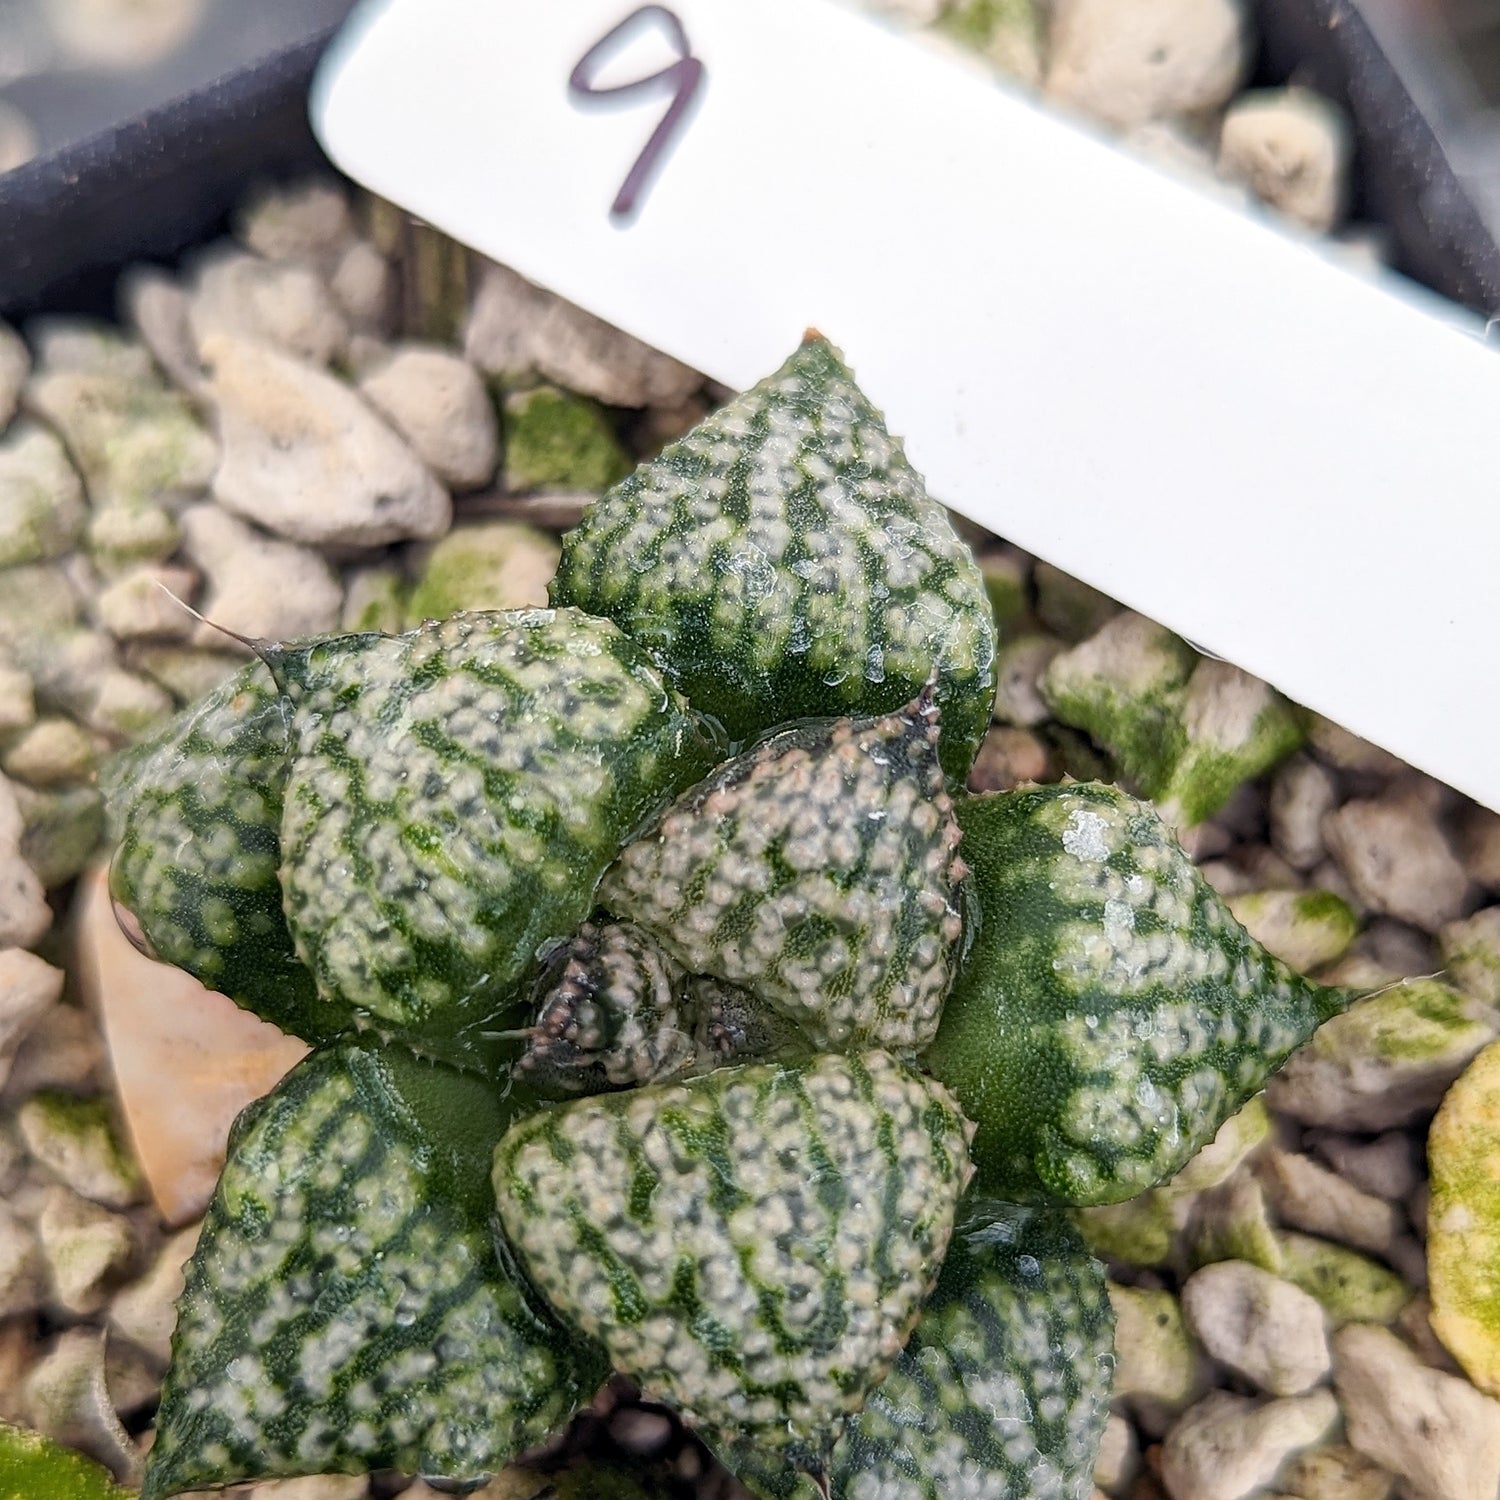 Haworthia "PP331" picta x Empress hybrid series #9 SOLD OUT